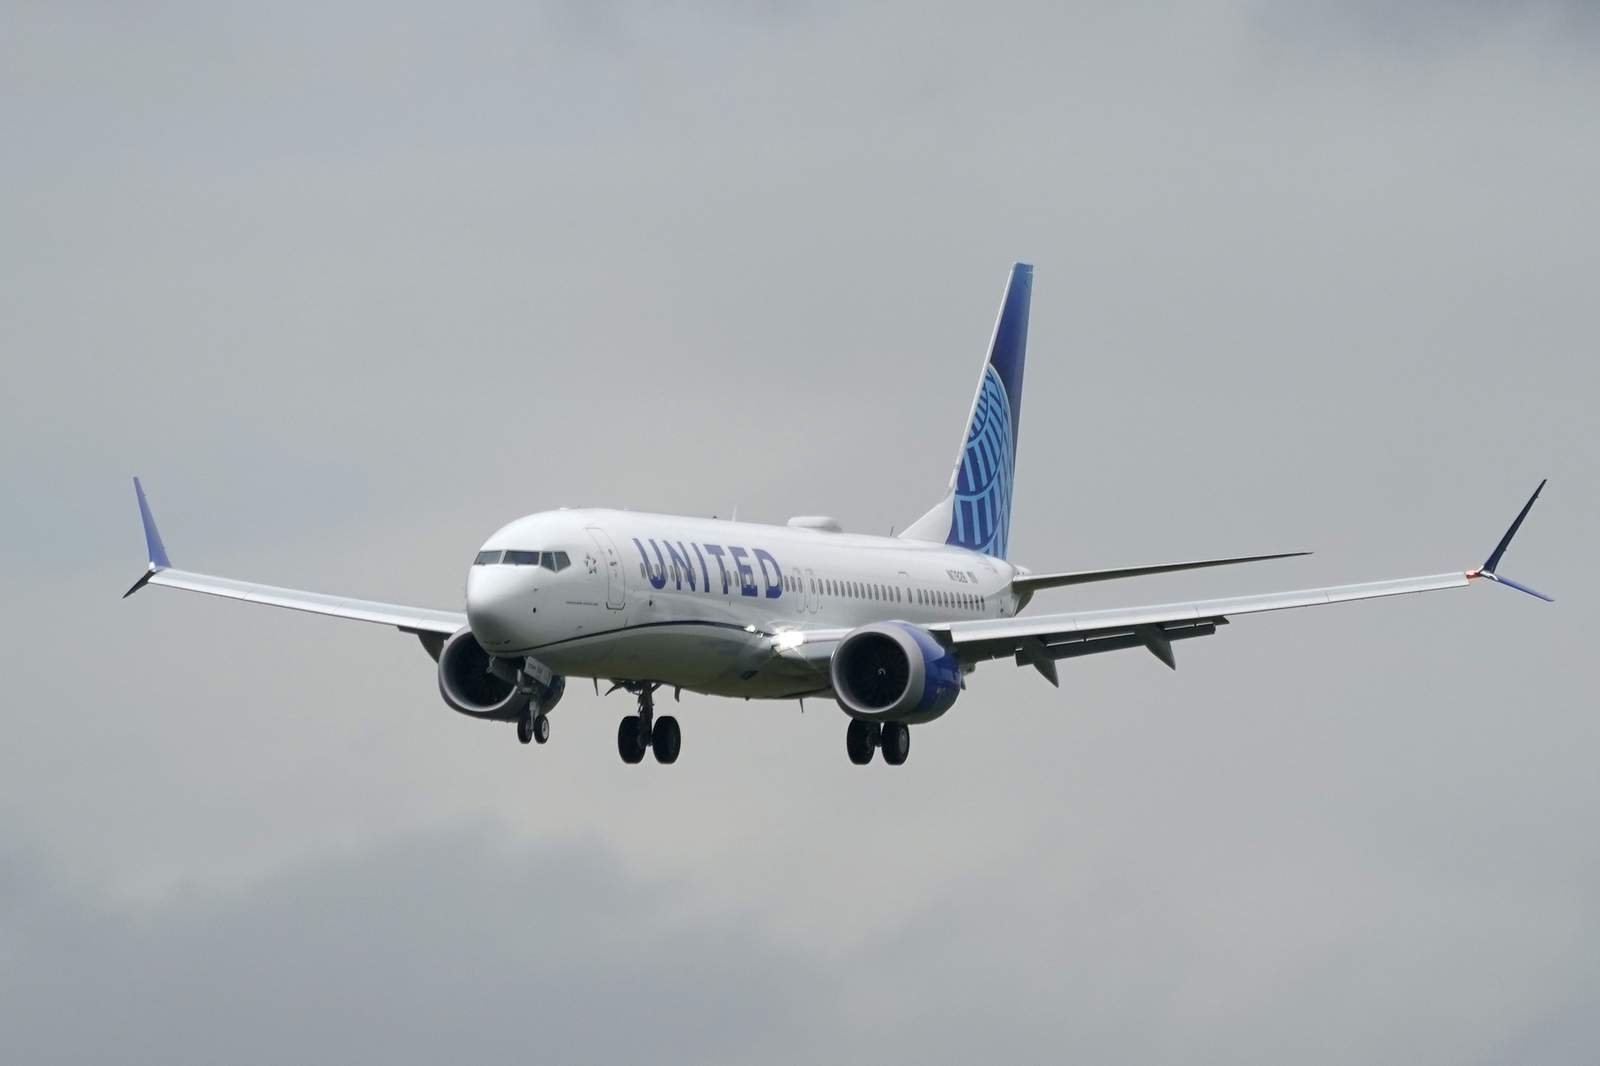 United Airlines helps distribute COVID-19 vaccines